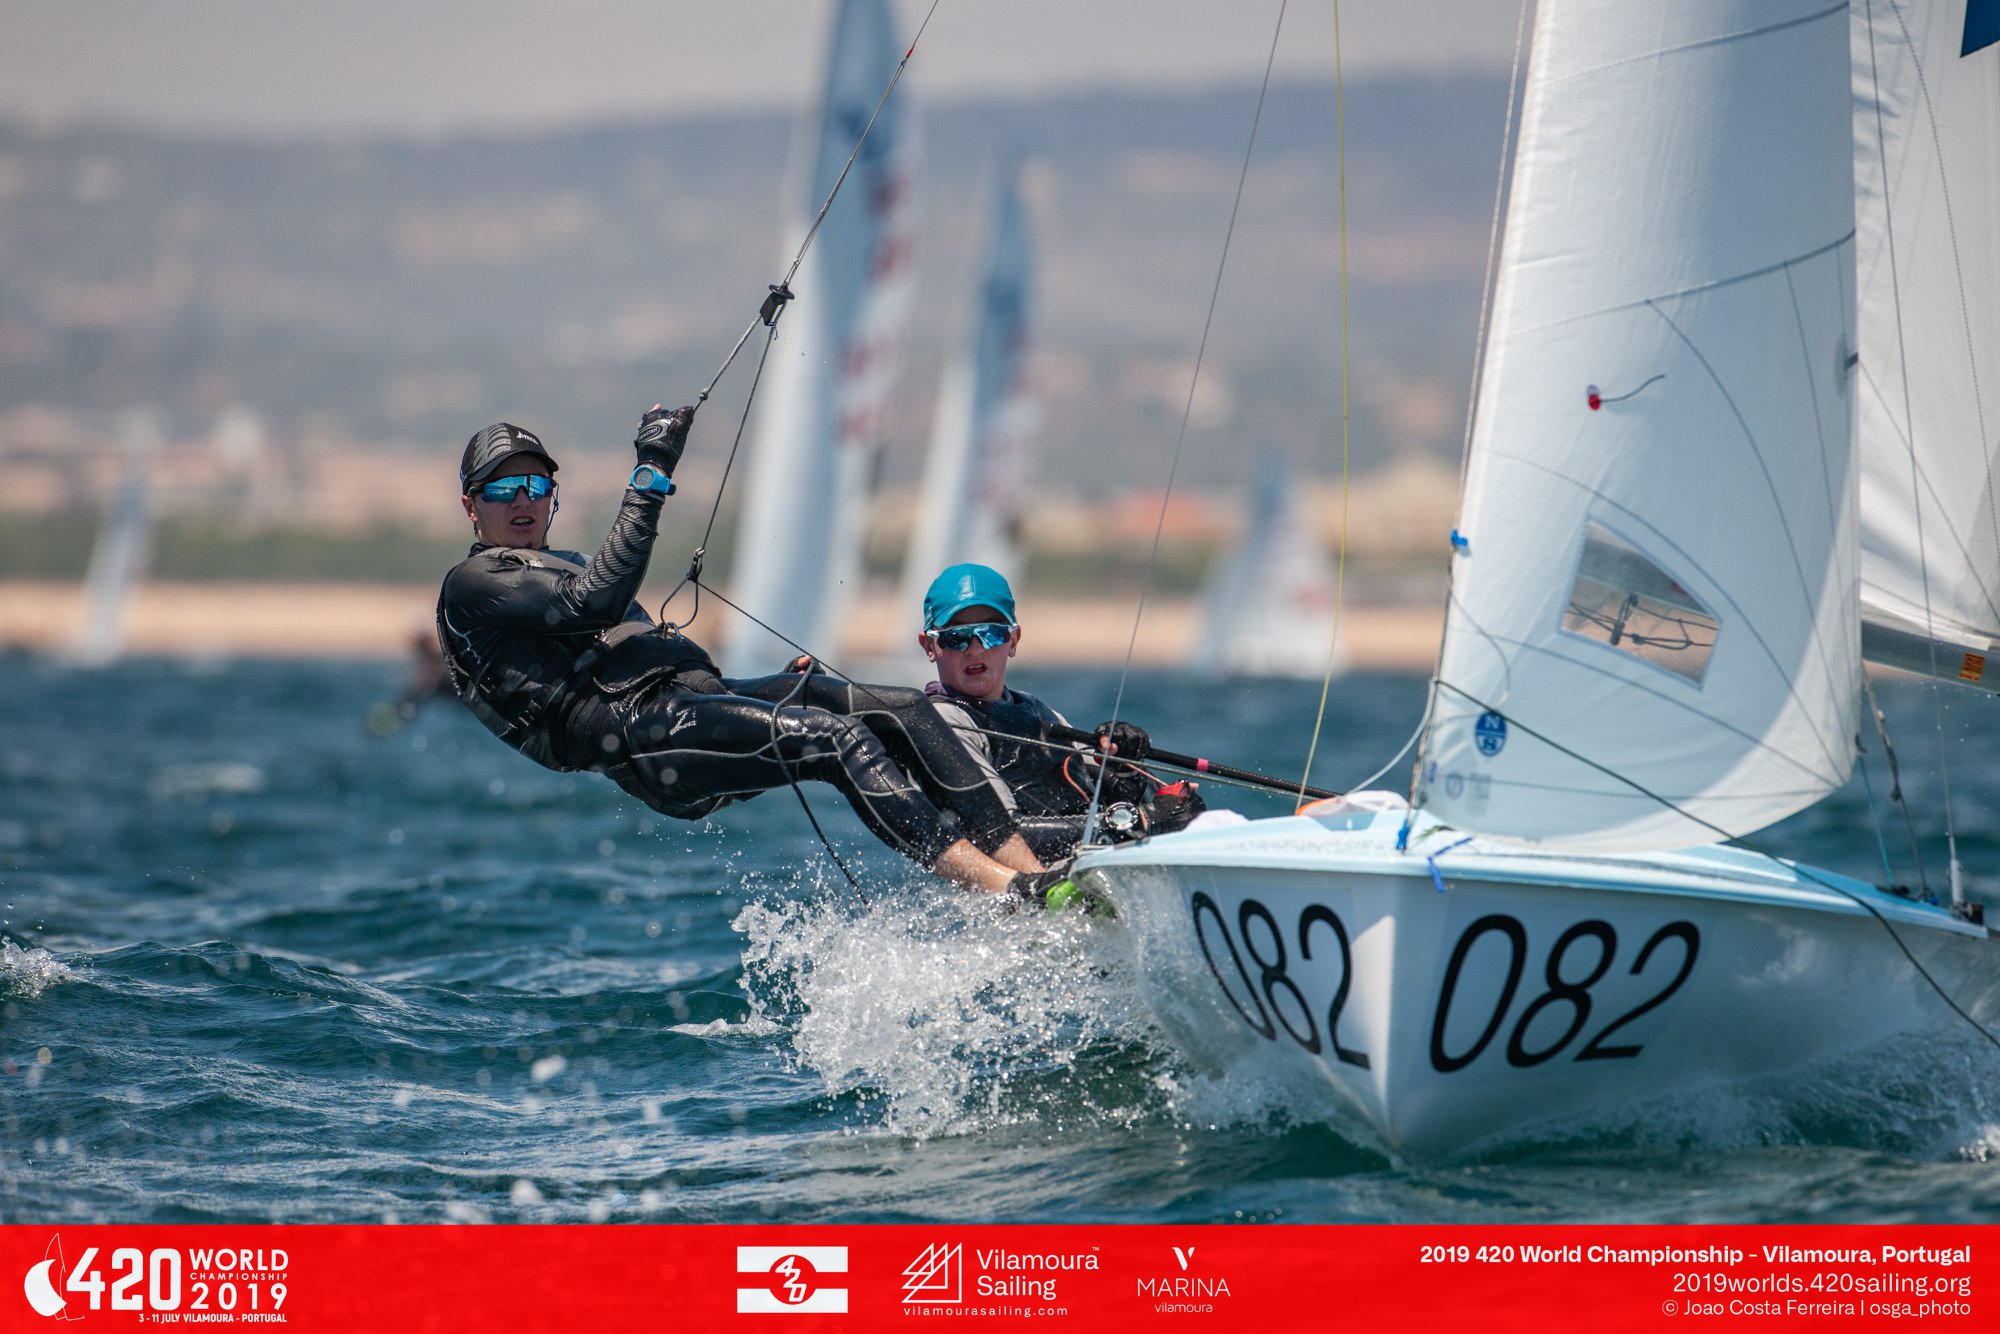 Mason MULCAHY/Andre VAN DAM (NZL) in 2nd overall in 420 Open